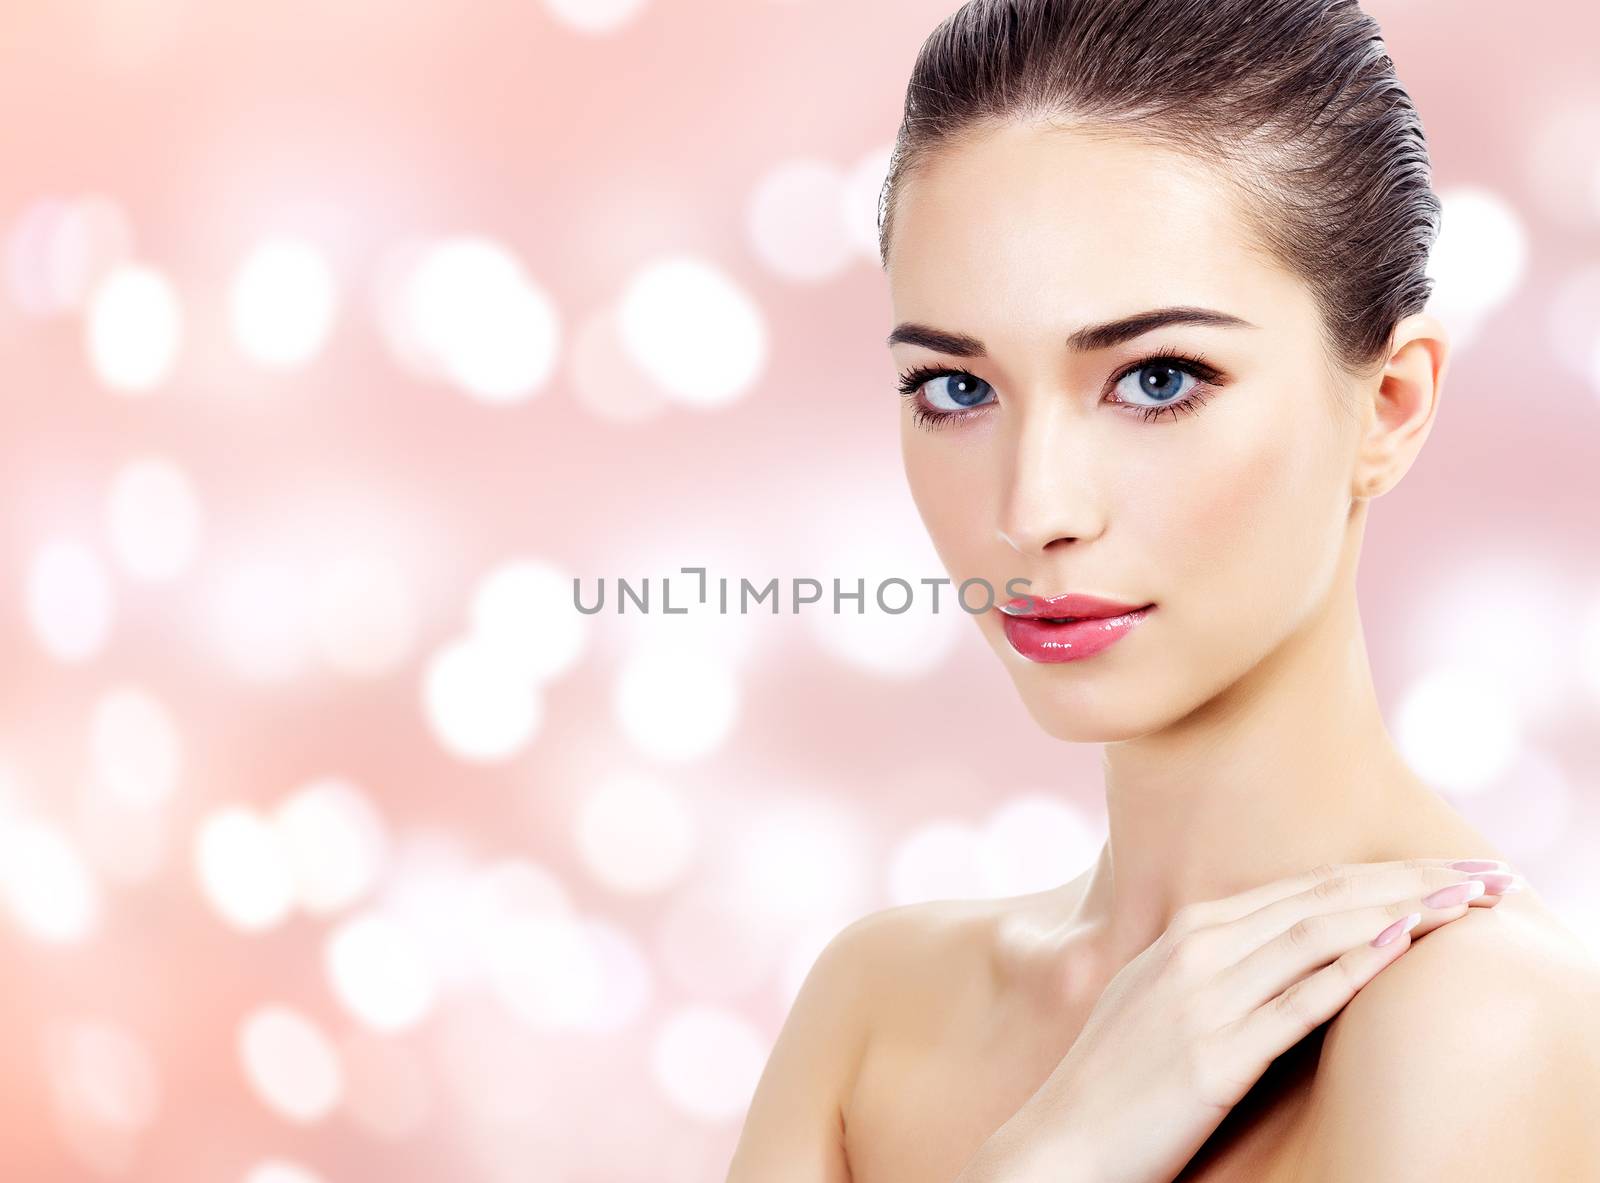 Young beautiful woman portrait, abstract background with blurred lights